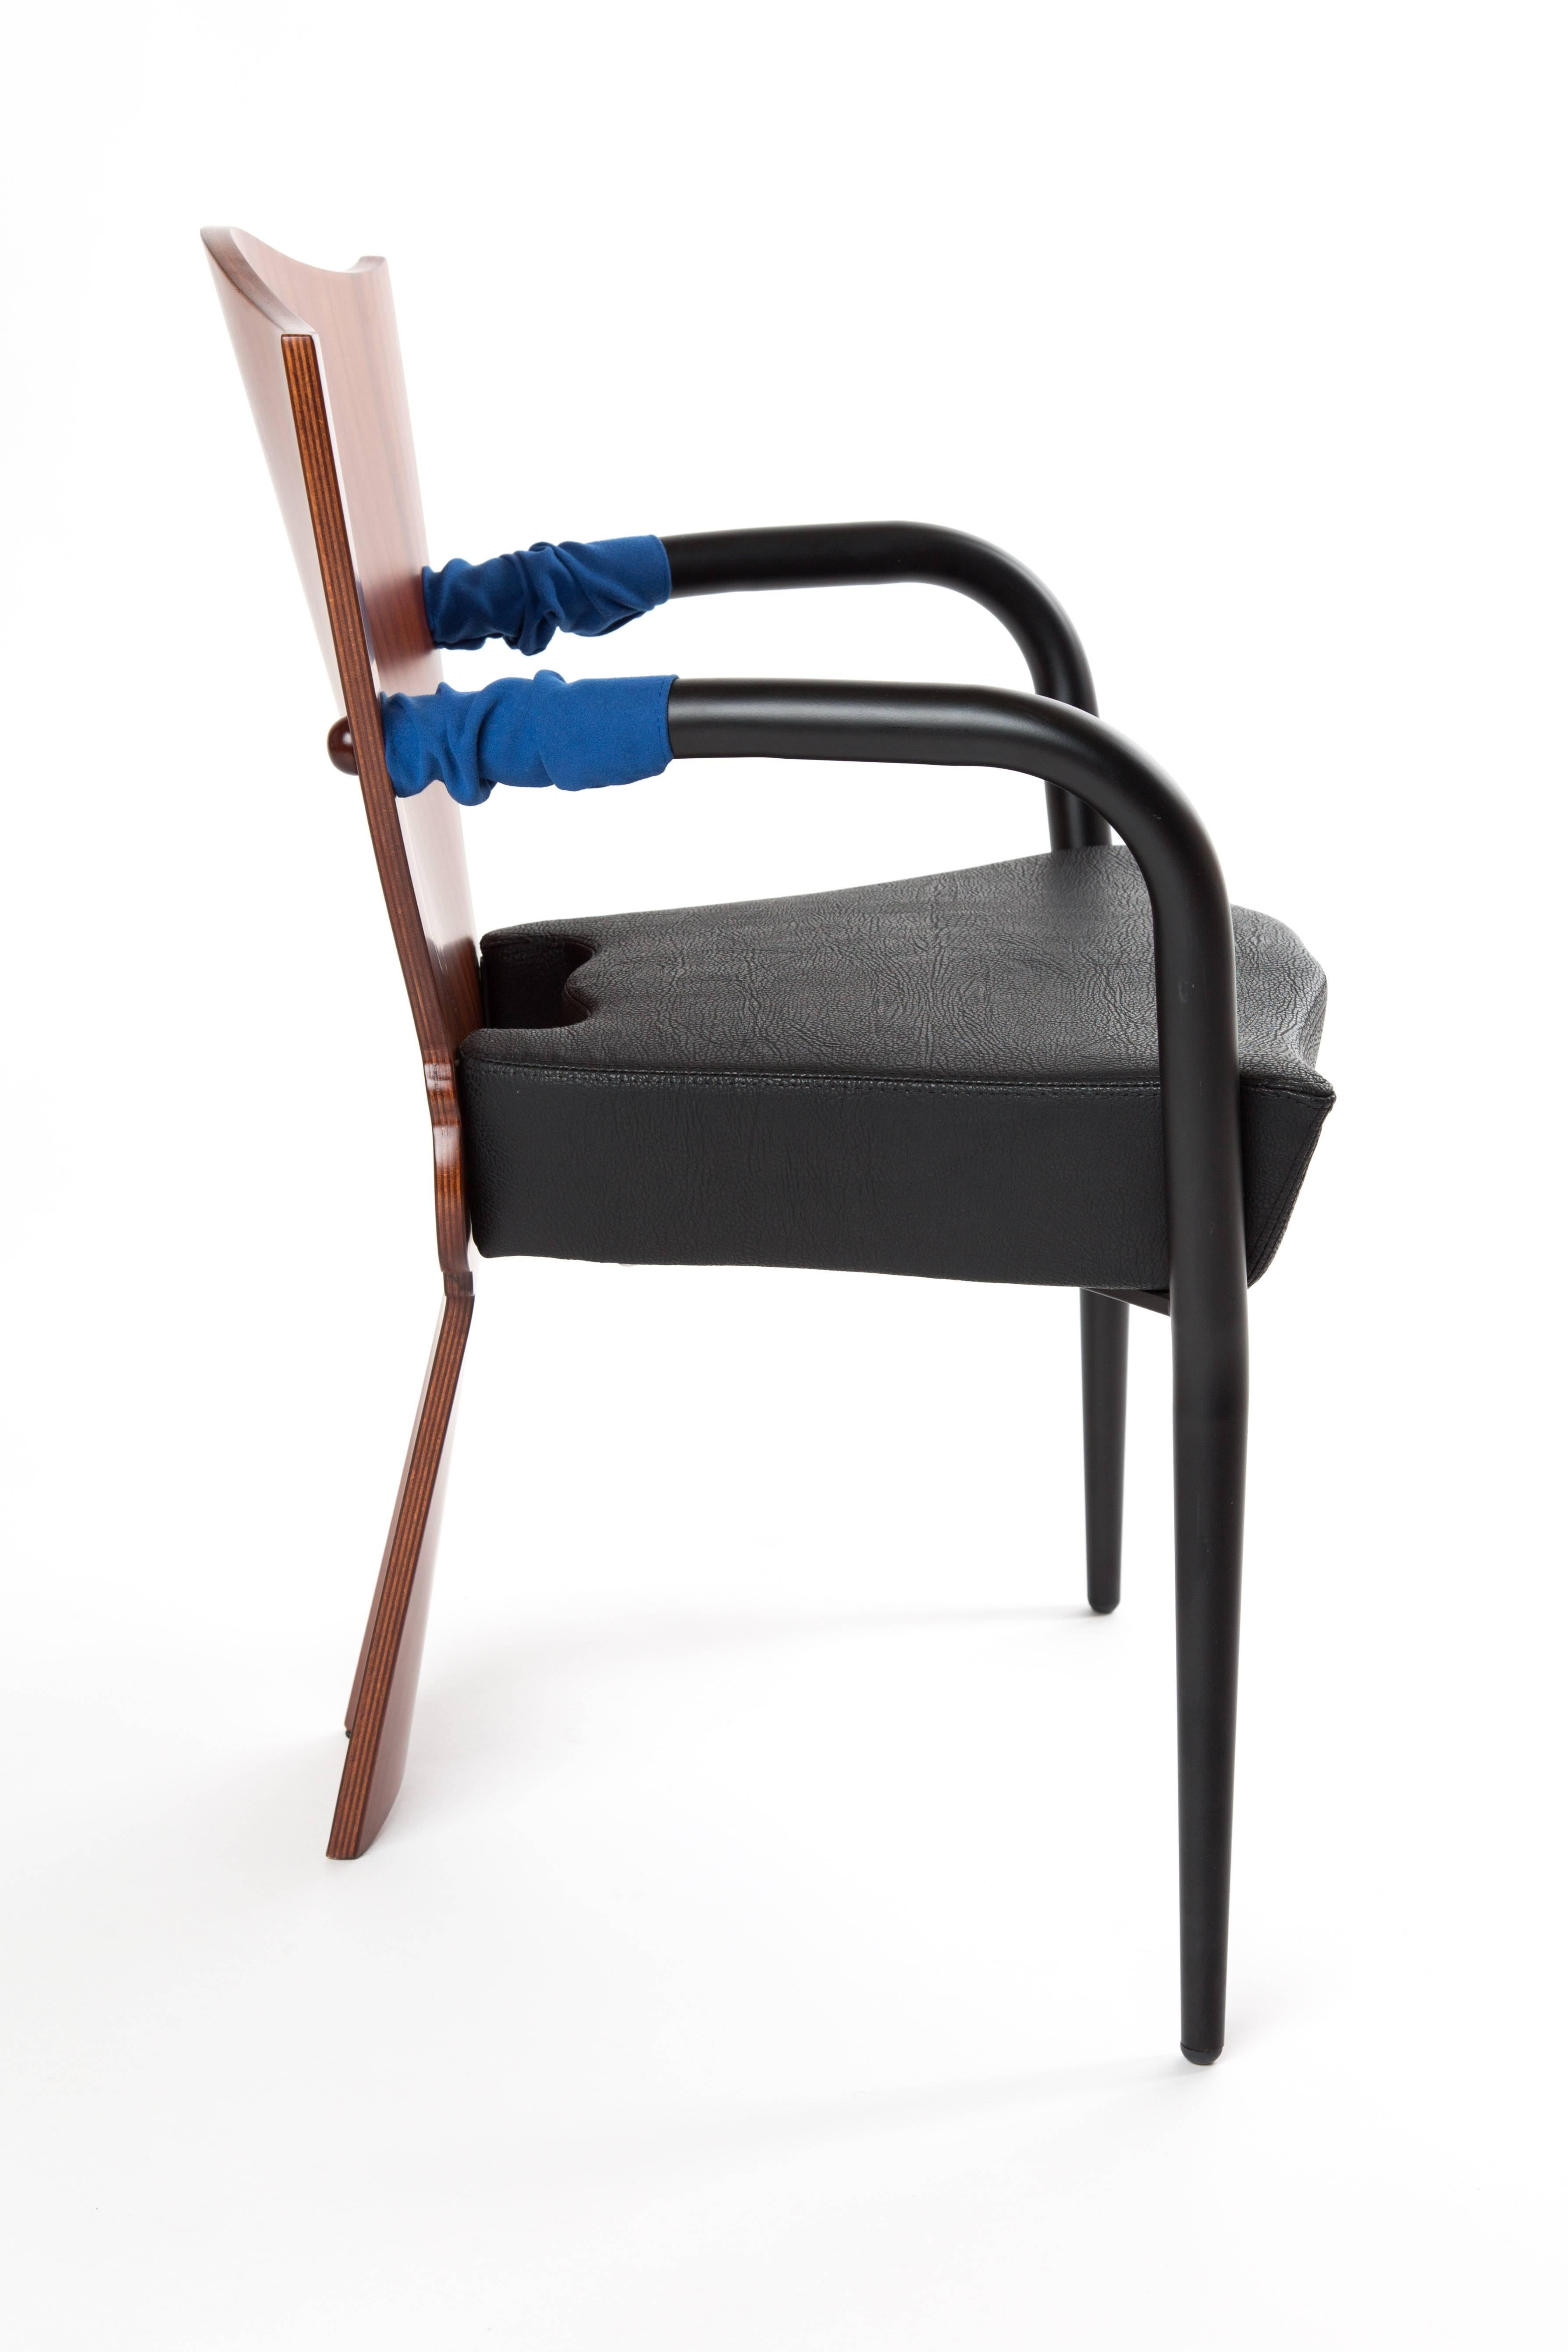 The Dalami chair designed Borek Sipek in 1994 for Scarabas. The chair is like a throne. He used different materials. Plywood for the back, cut in a classic form, looks like a tulip, metal legs with a soft blue part of fabric. The sitting is of raw